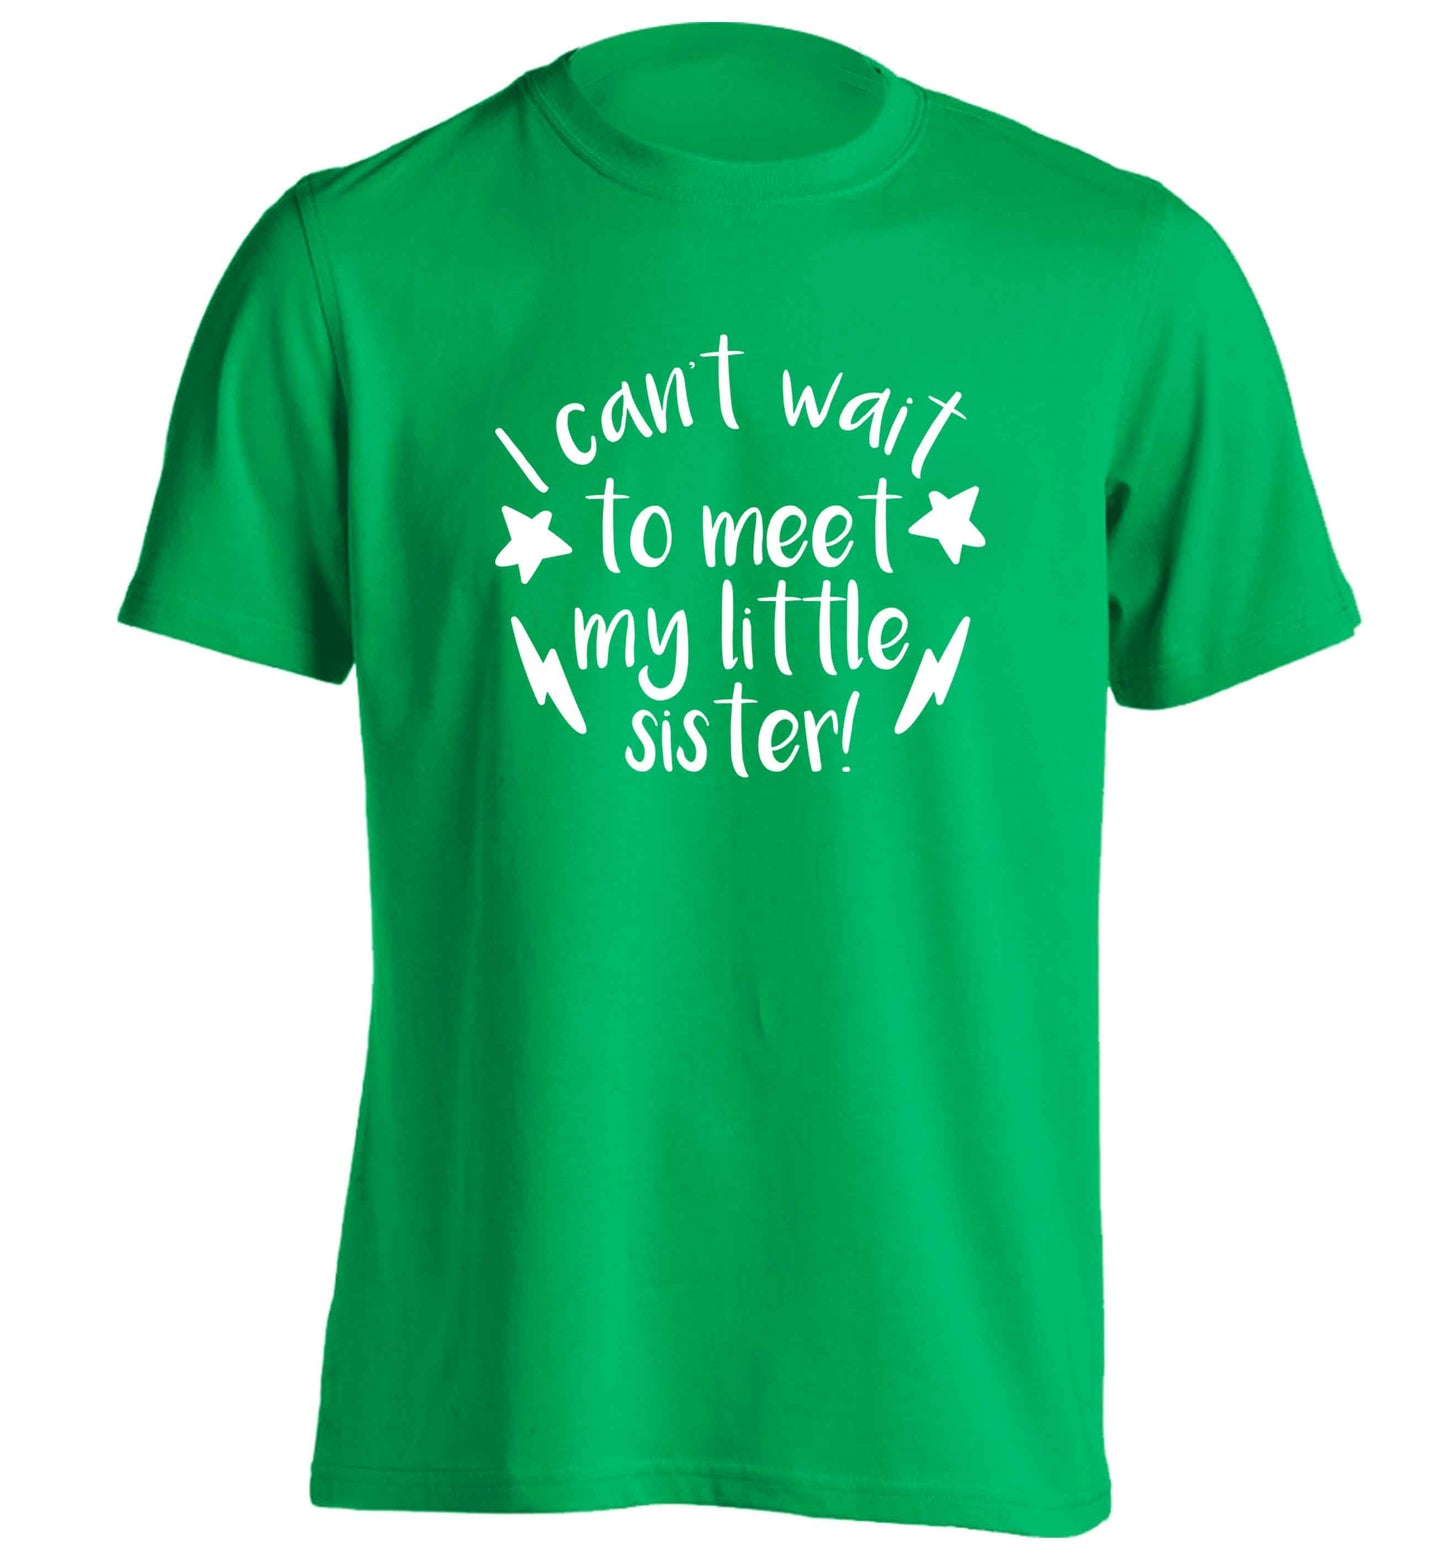 Something special growing inside it's my little sister I can't wait to say hi! adults unisex green Tshirt 2XL